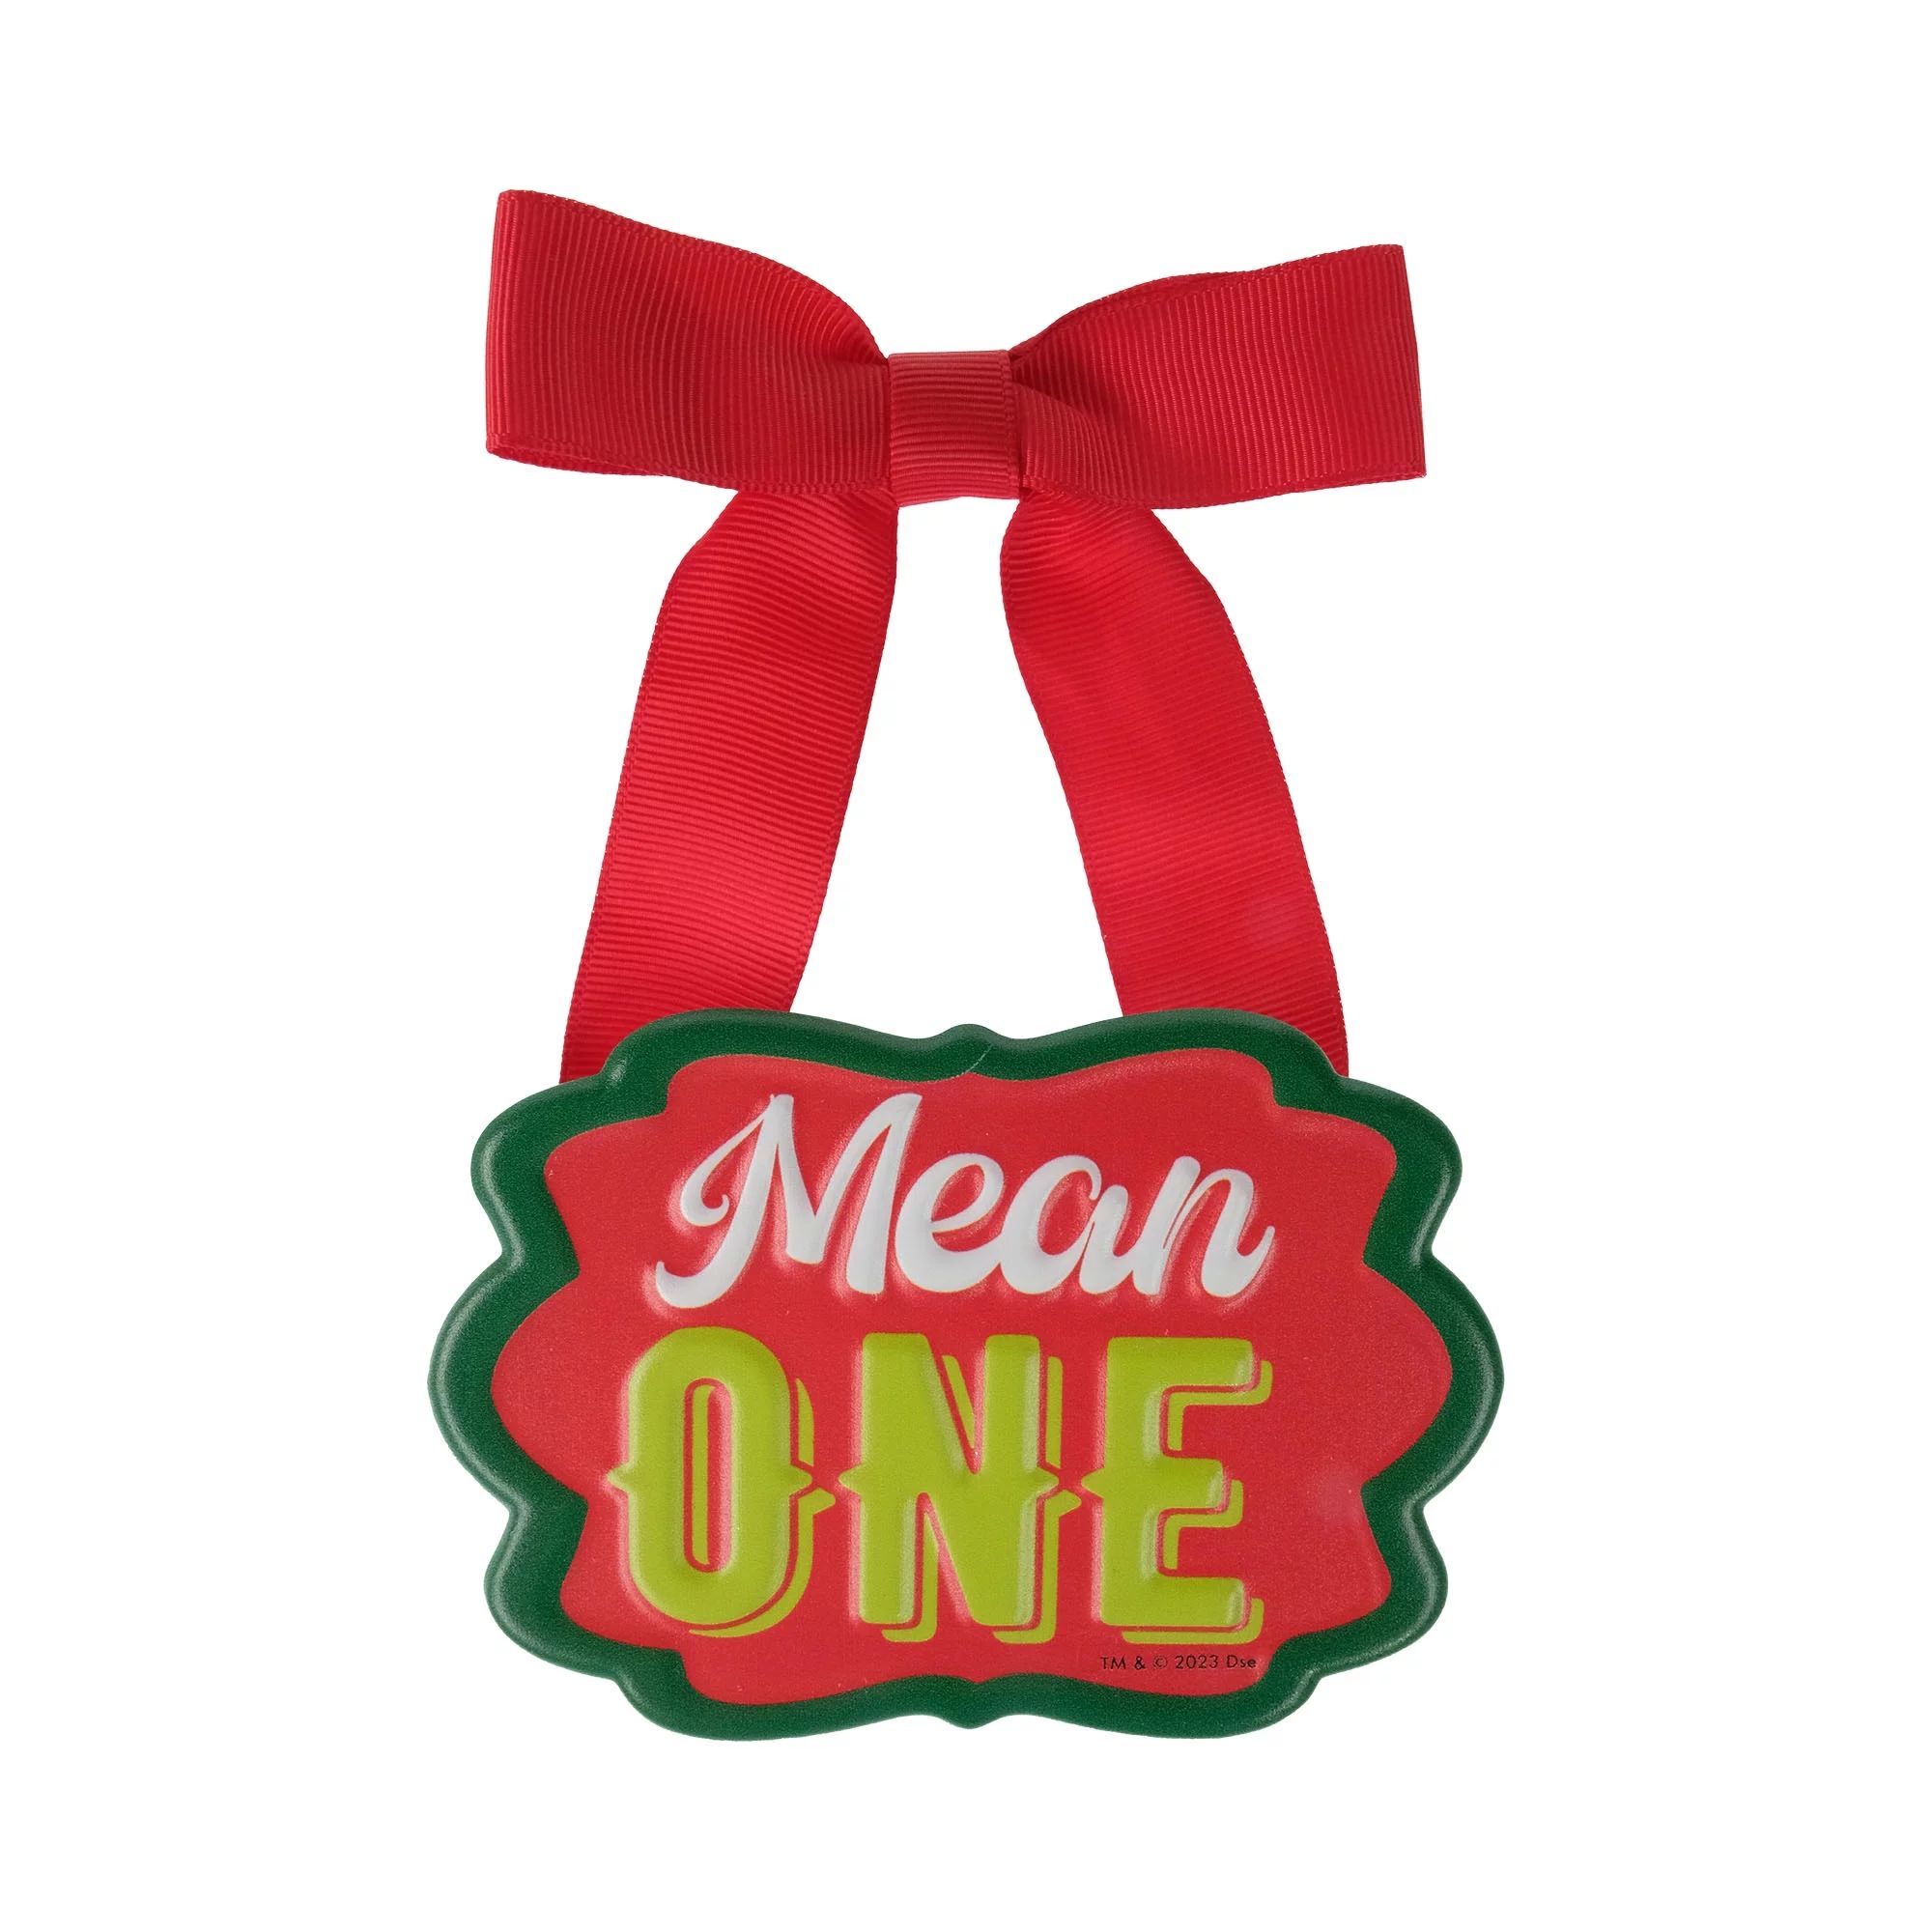 The Grinch Who Stole Christmas, "Mean One" Mini Metal Sign, Red, 3.4" HIgh | Walmart (US)